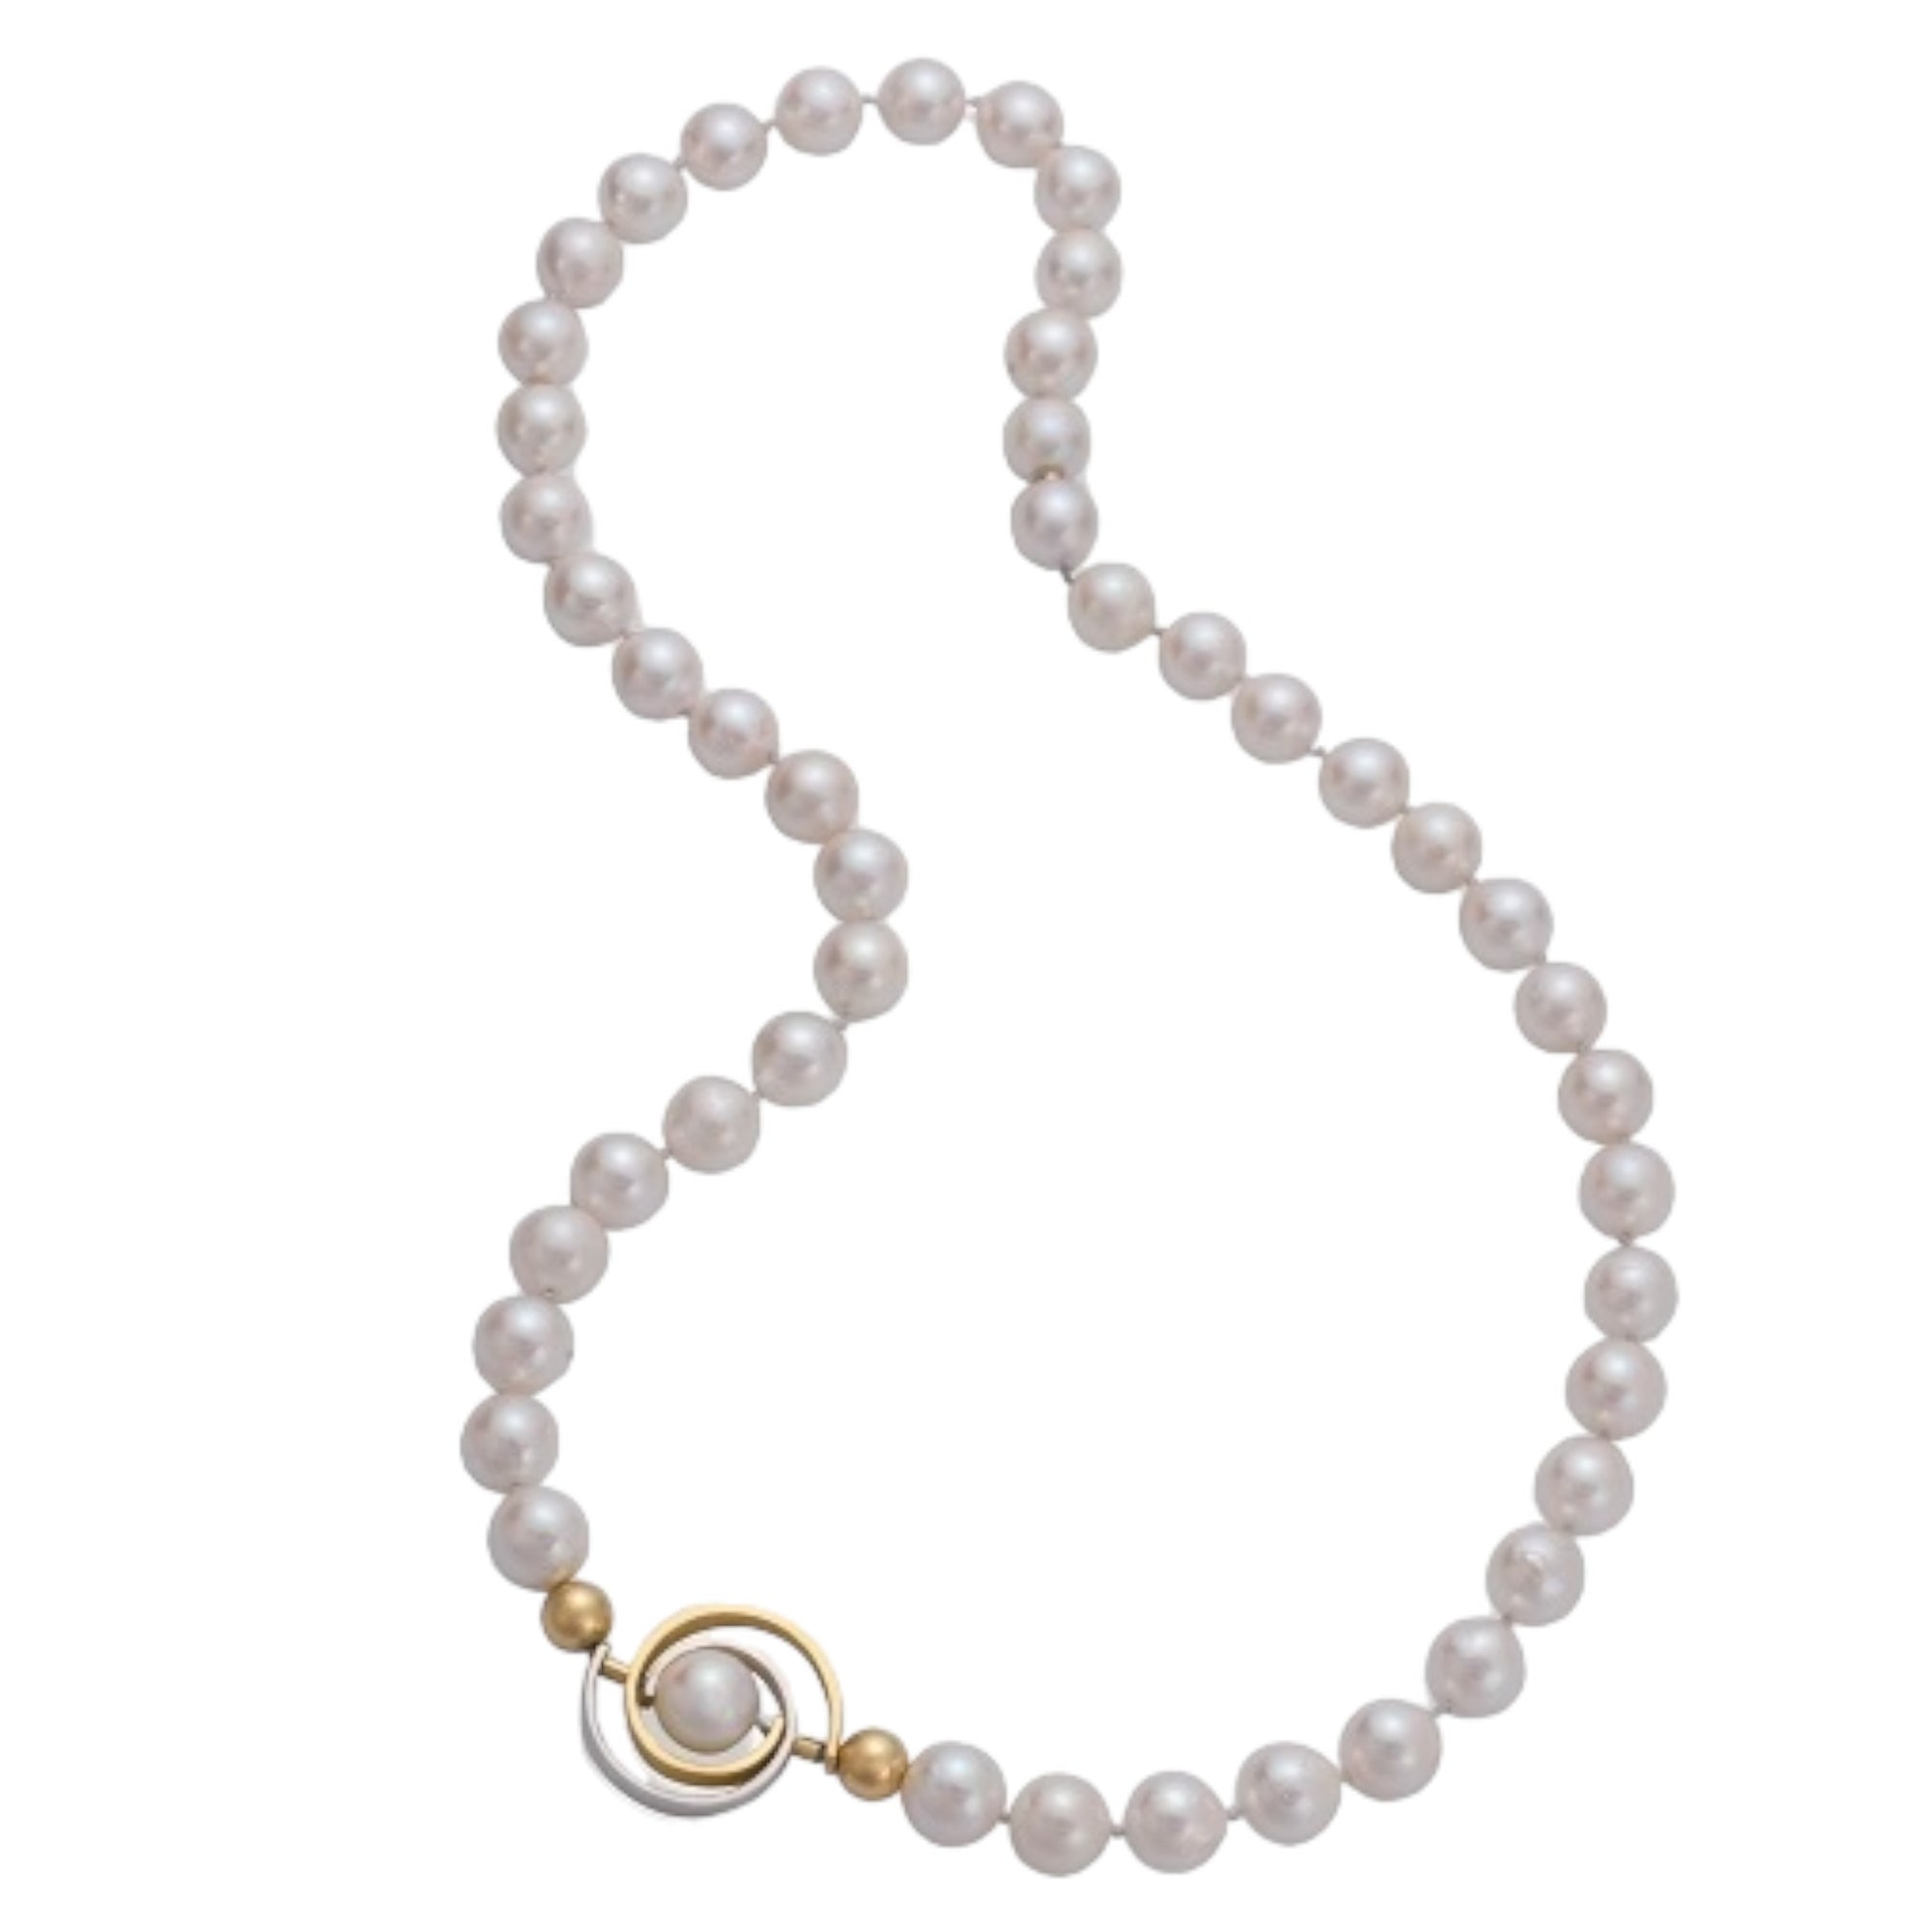 Orbit Pearl 2-tone Necklace by Martha Seely vailable at Talisman Collection Fine Jewelers in El Dorado Hills, CA and online. Stats: Experience the stunning beauty of the Orbit Pearl 2-tone Necklace by Martha Seely, featuring an exquisite 18" pearl necklace adorned with a unique spiral design and lustrous Japanese Akoya pearls. Surrounding the pearls on either side are 6mm heavy wall gold beads, adding an elegant touch to this eye-catching piece of jewelry.